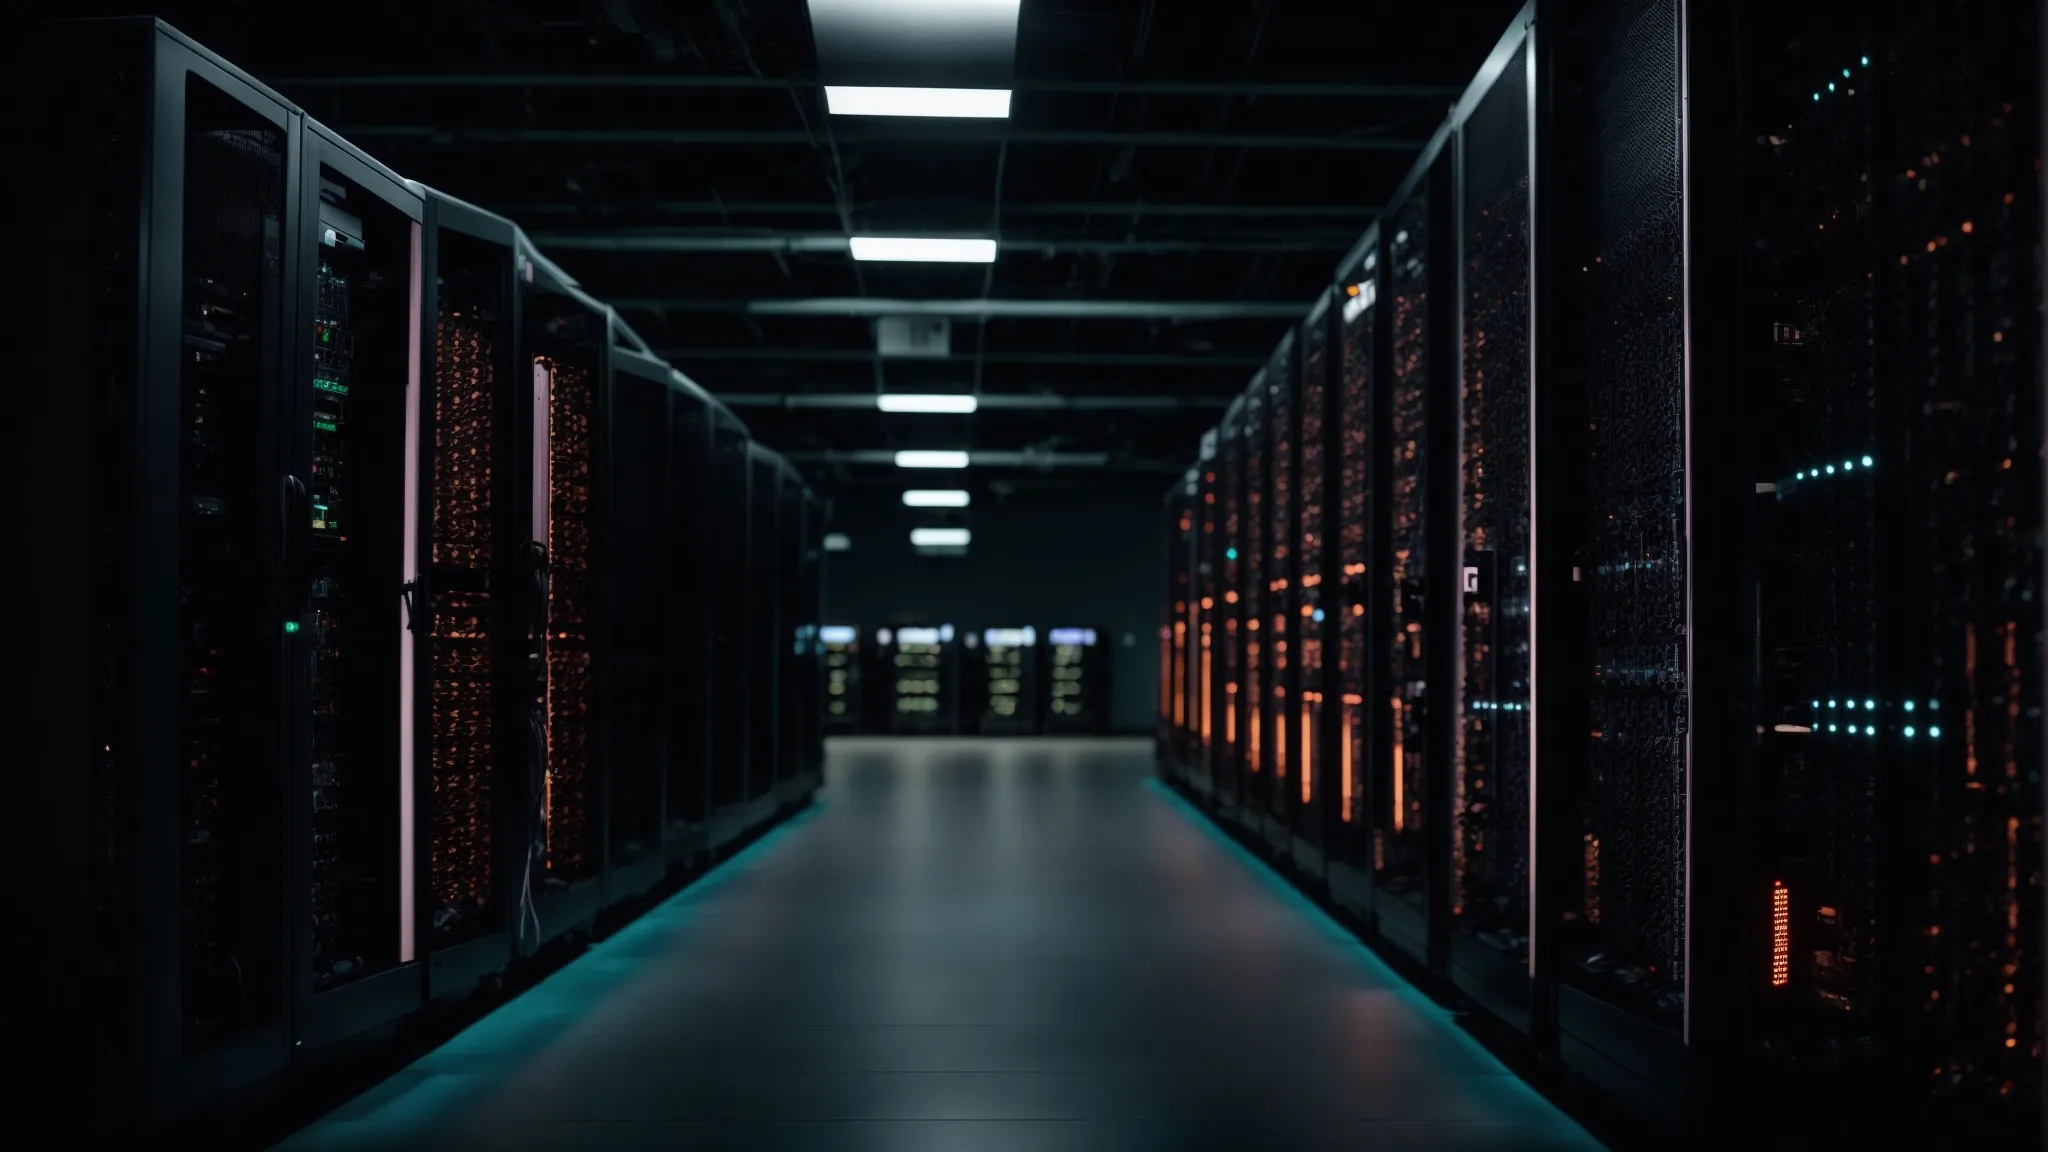 a row of servers with blinking lights in a dark data center room.